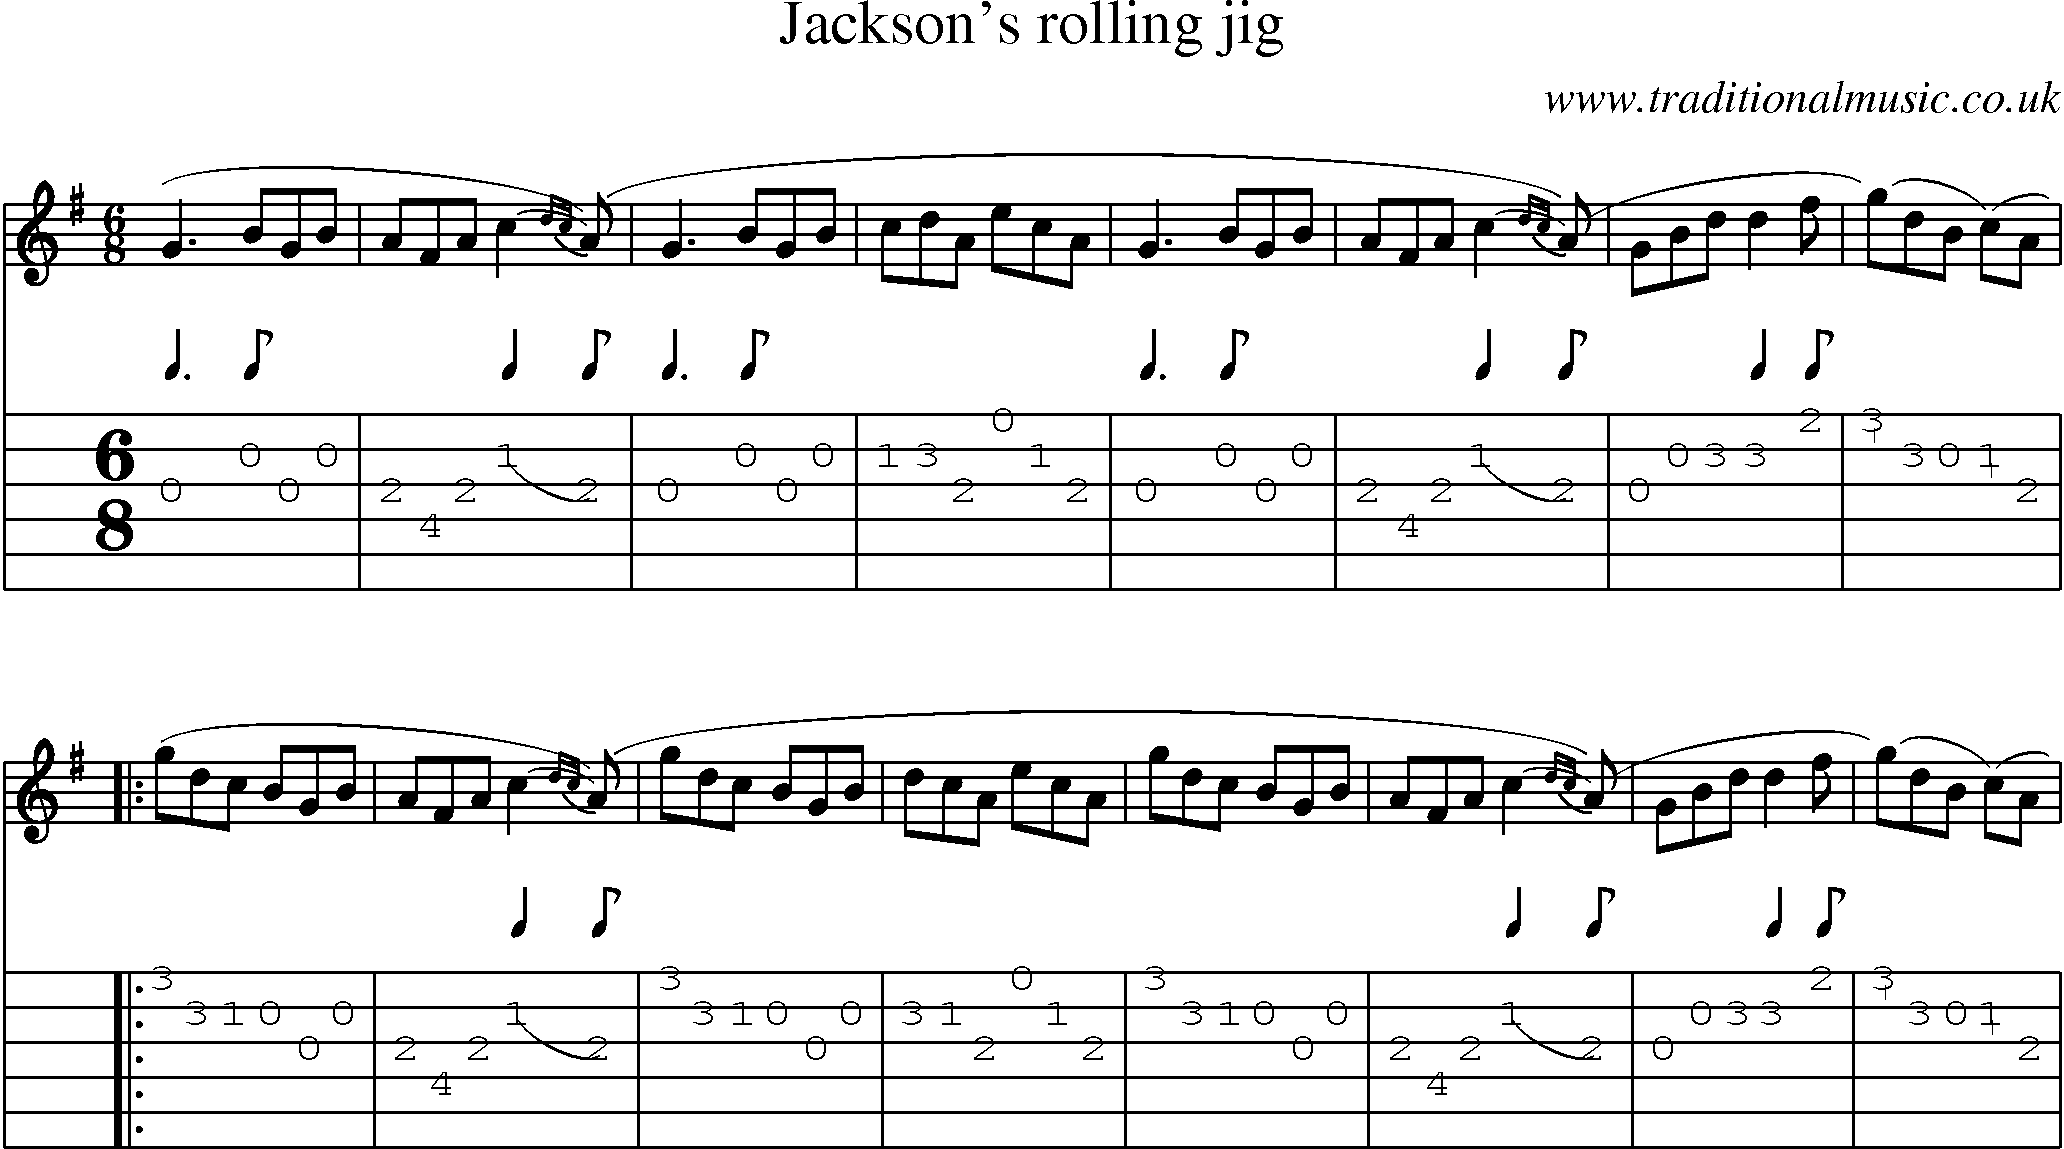 Music Score and Guitar Tabs for Jacksons Rolling Jig